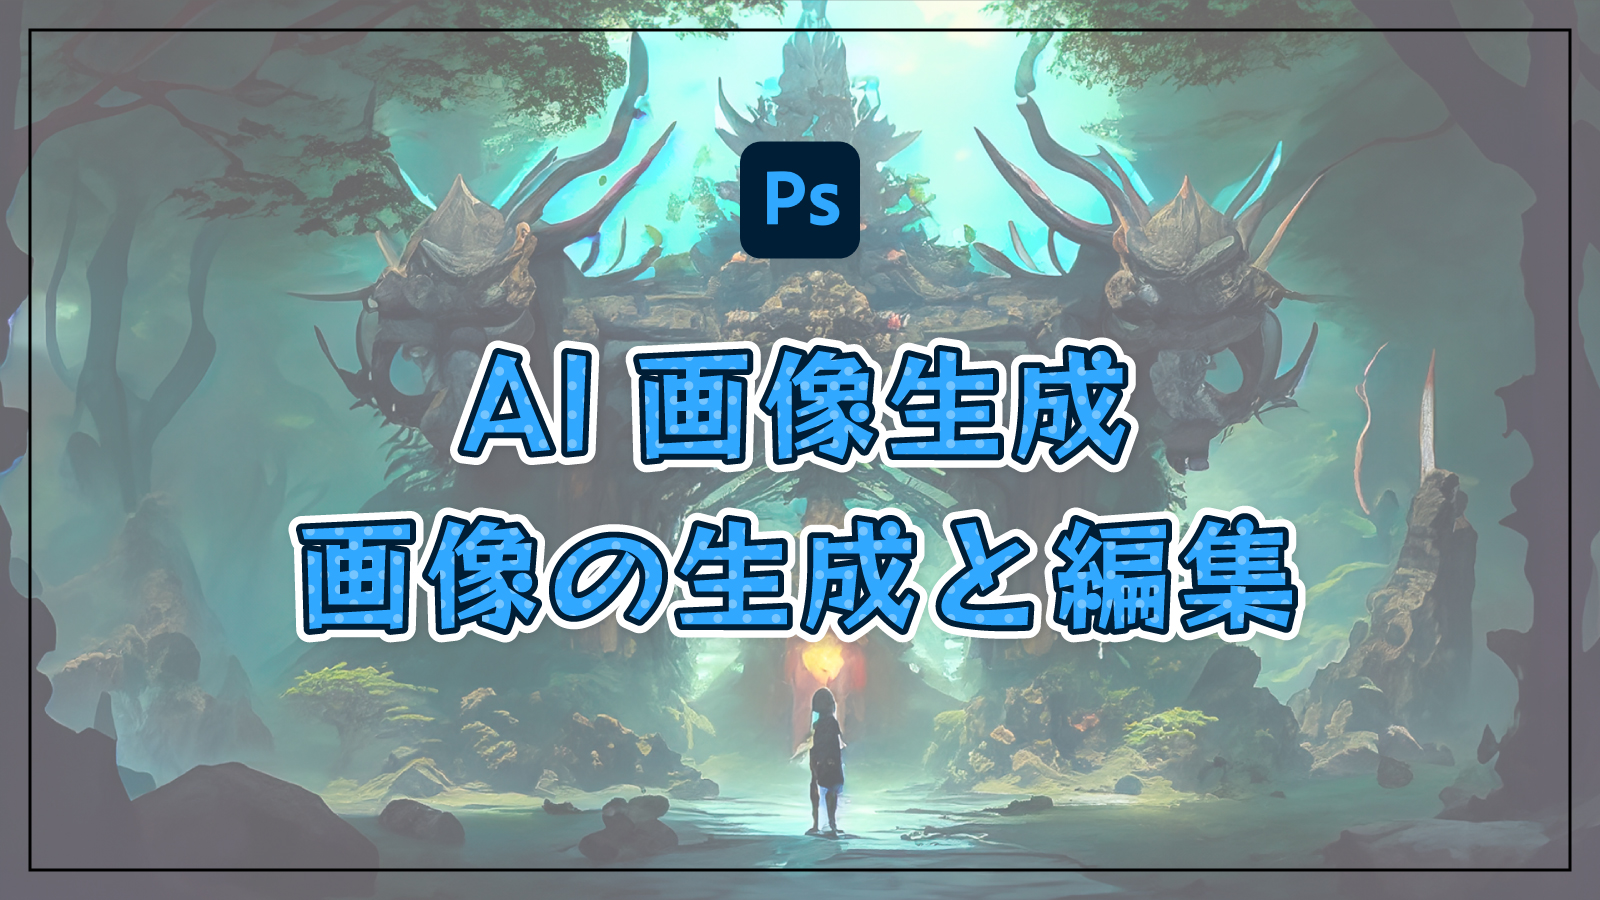 【Photoshop】AI画像生成で楽して画像を生成・編集する方法（生成塗りつぶし）